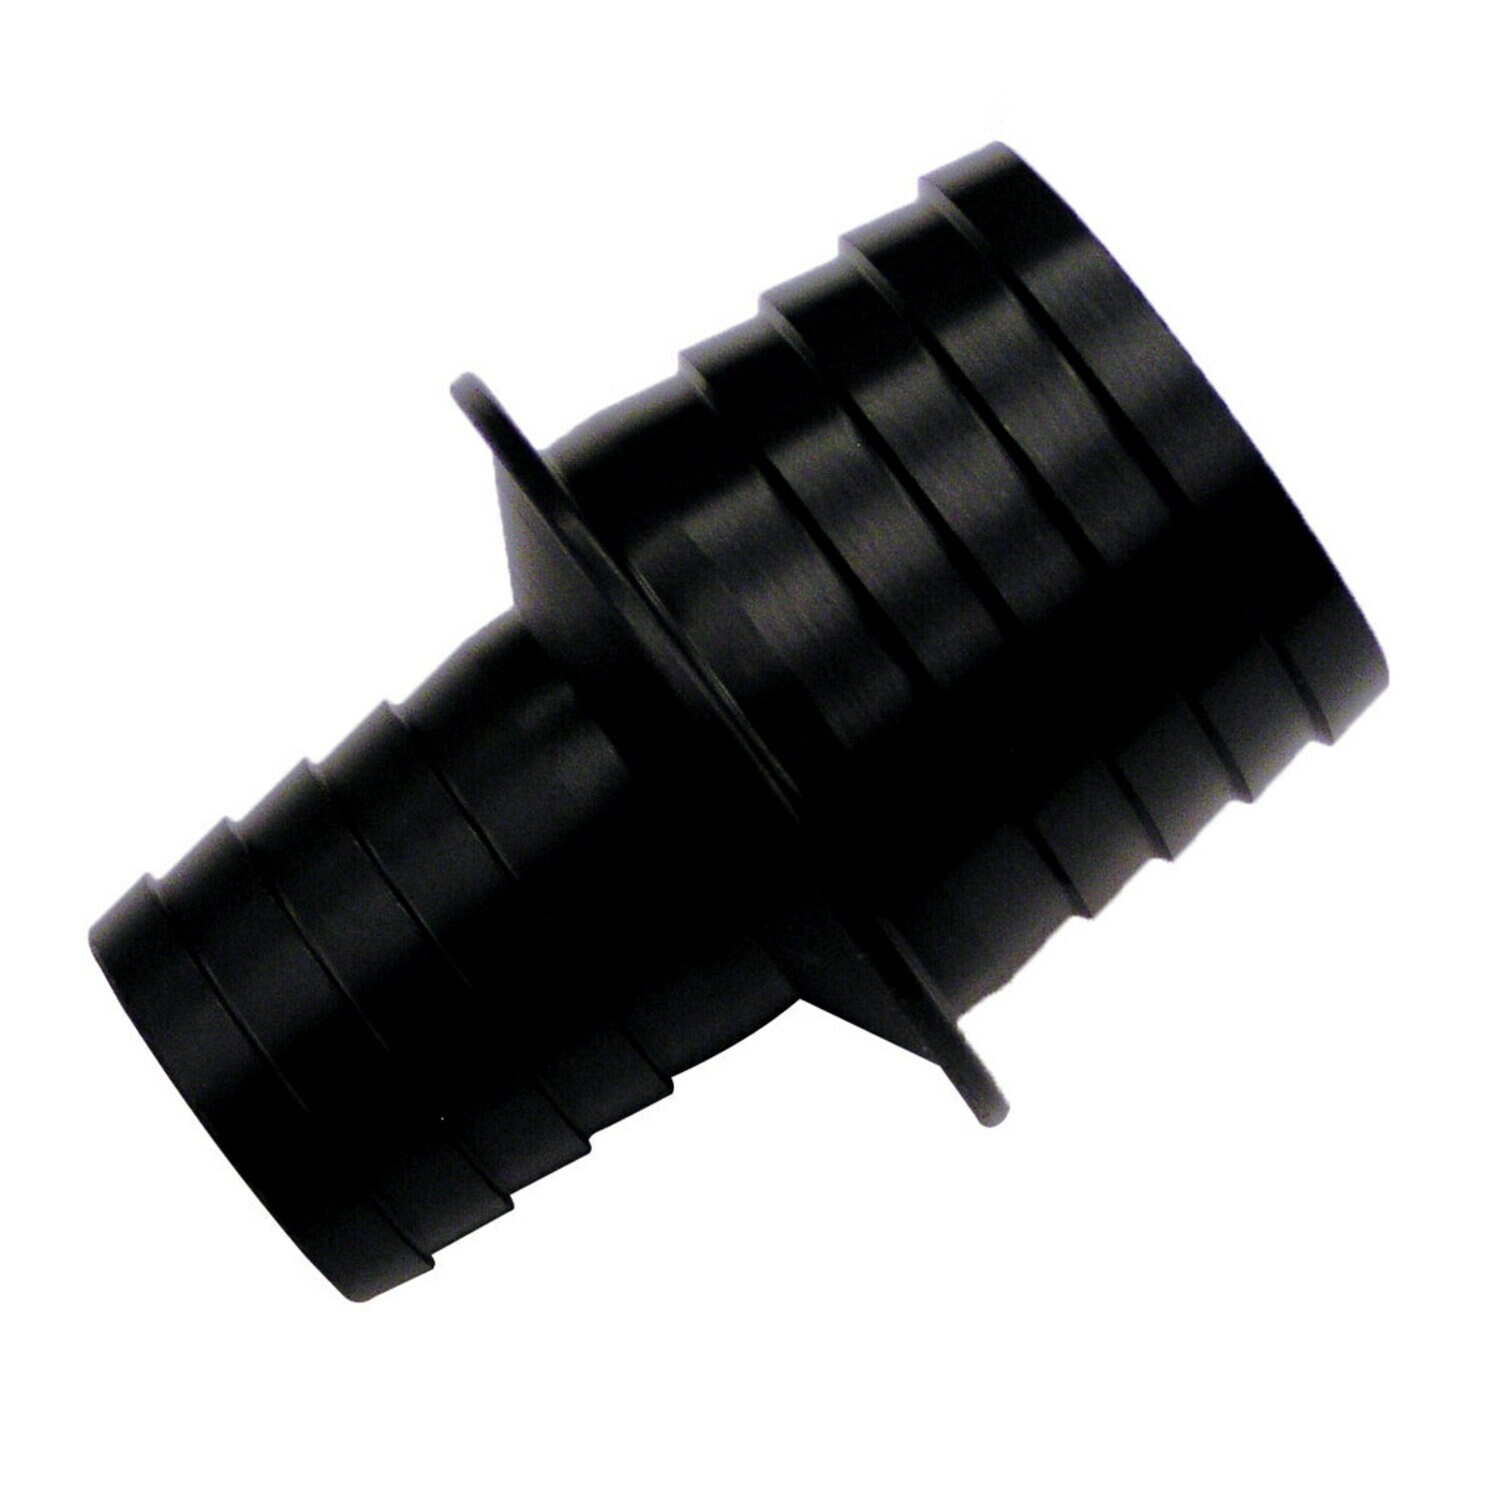 7000045311 - 3M Vacuum Hose Adapter 30440, 1 in ID to 1-1/2 in ID